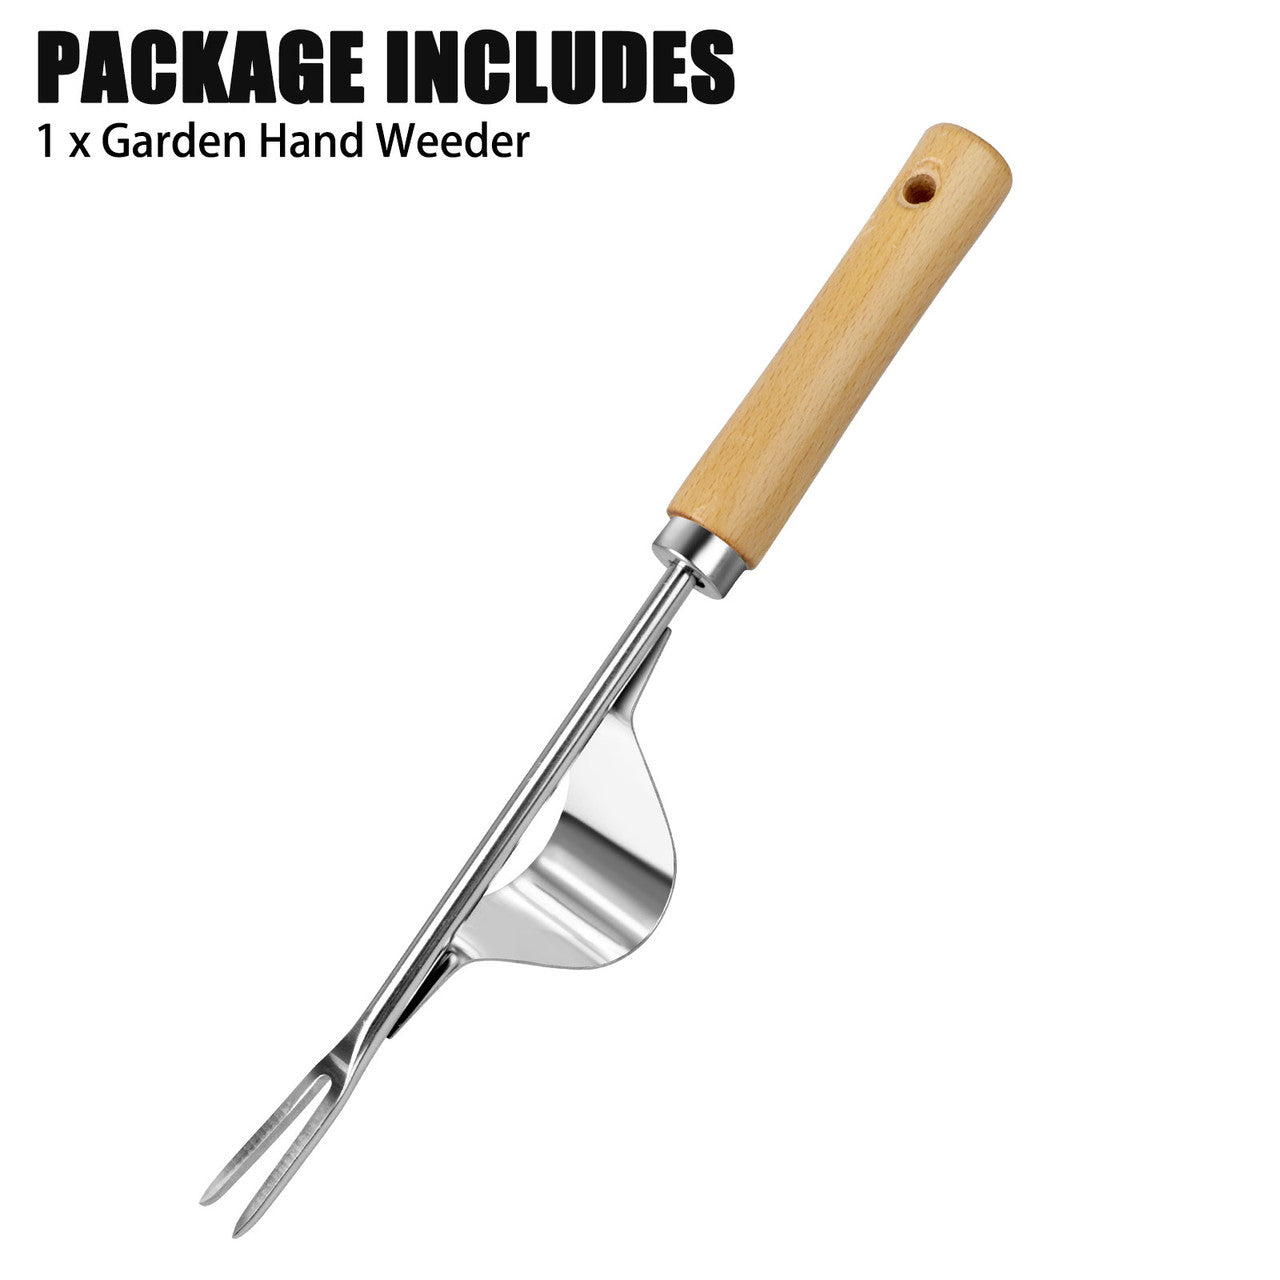 Garden Weeding Tool with Ergonomic Handle, Stainless Steel Bend-Proof for Easy Weed Removal